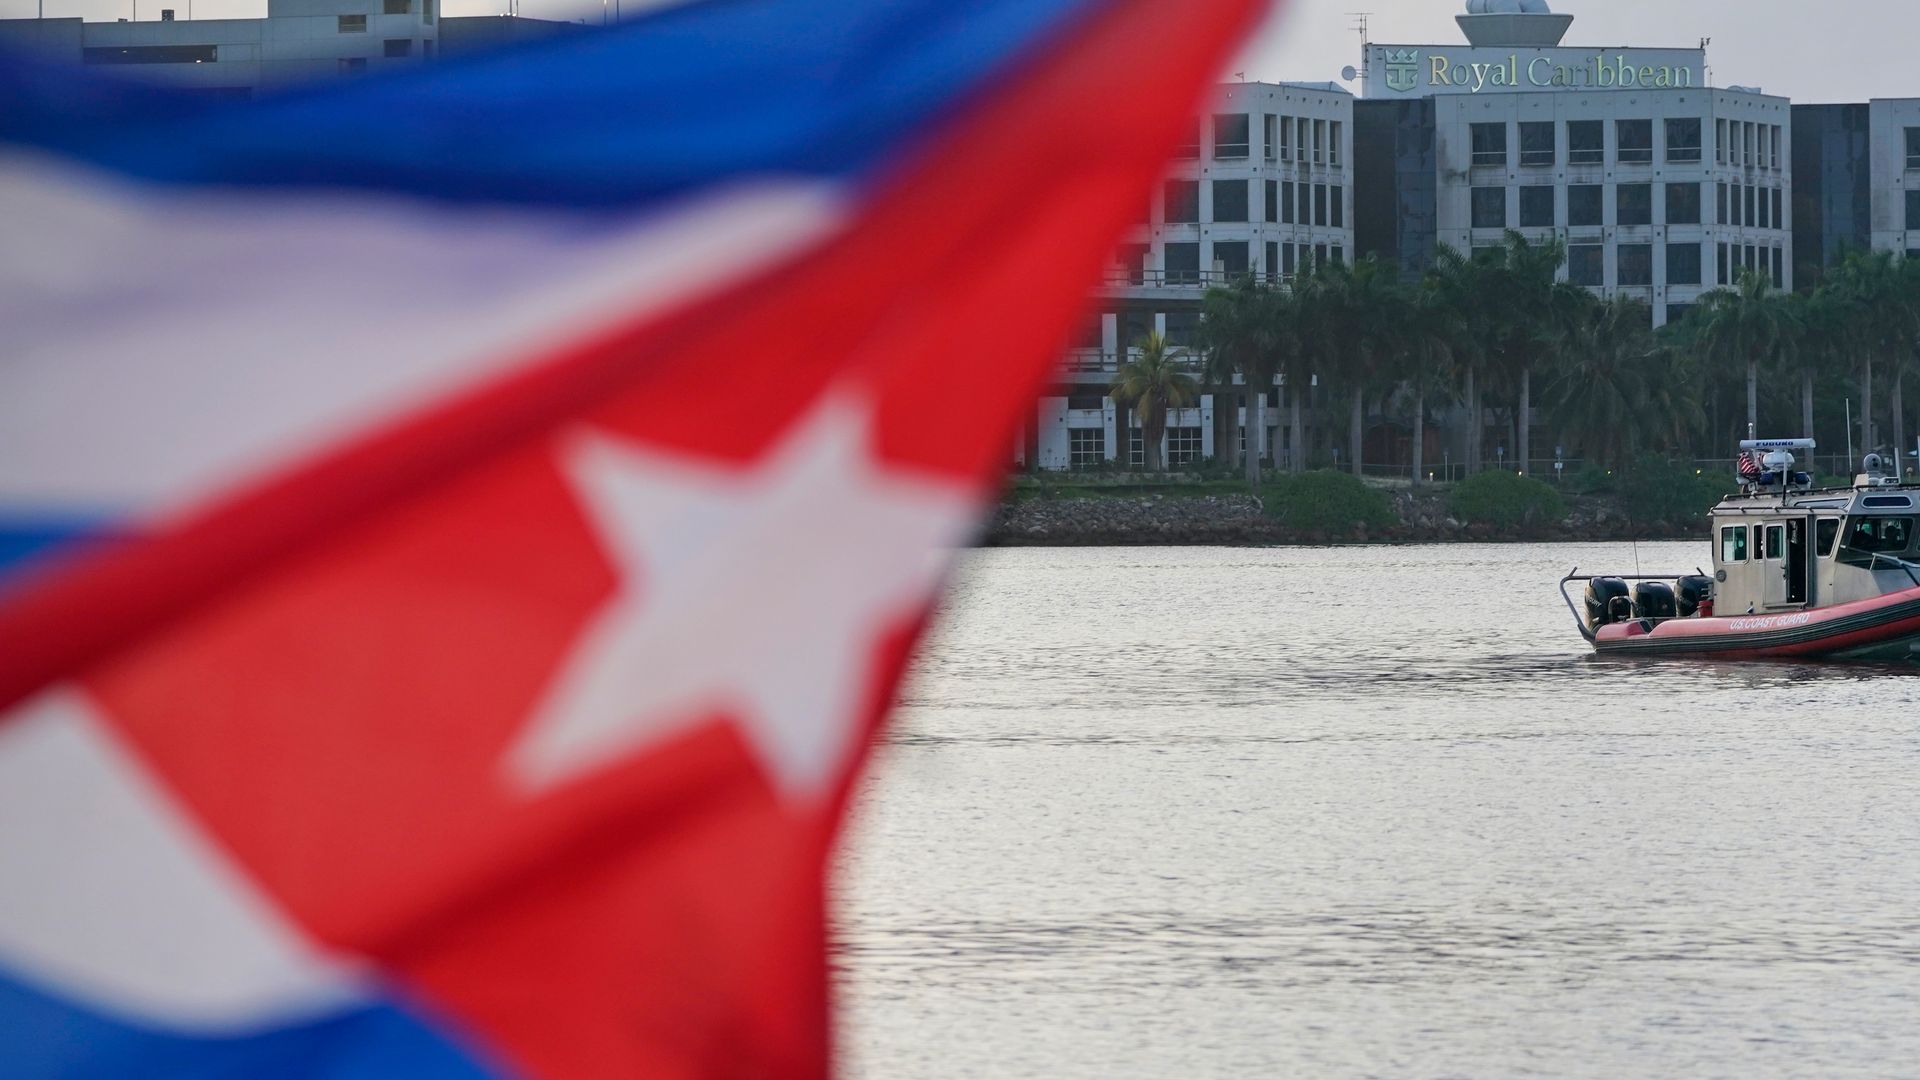 As Cuba announced arrests in a human trafficking ring, the CIA renewed its push to turn some Russians into spies against their own government.